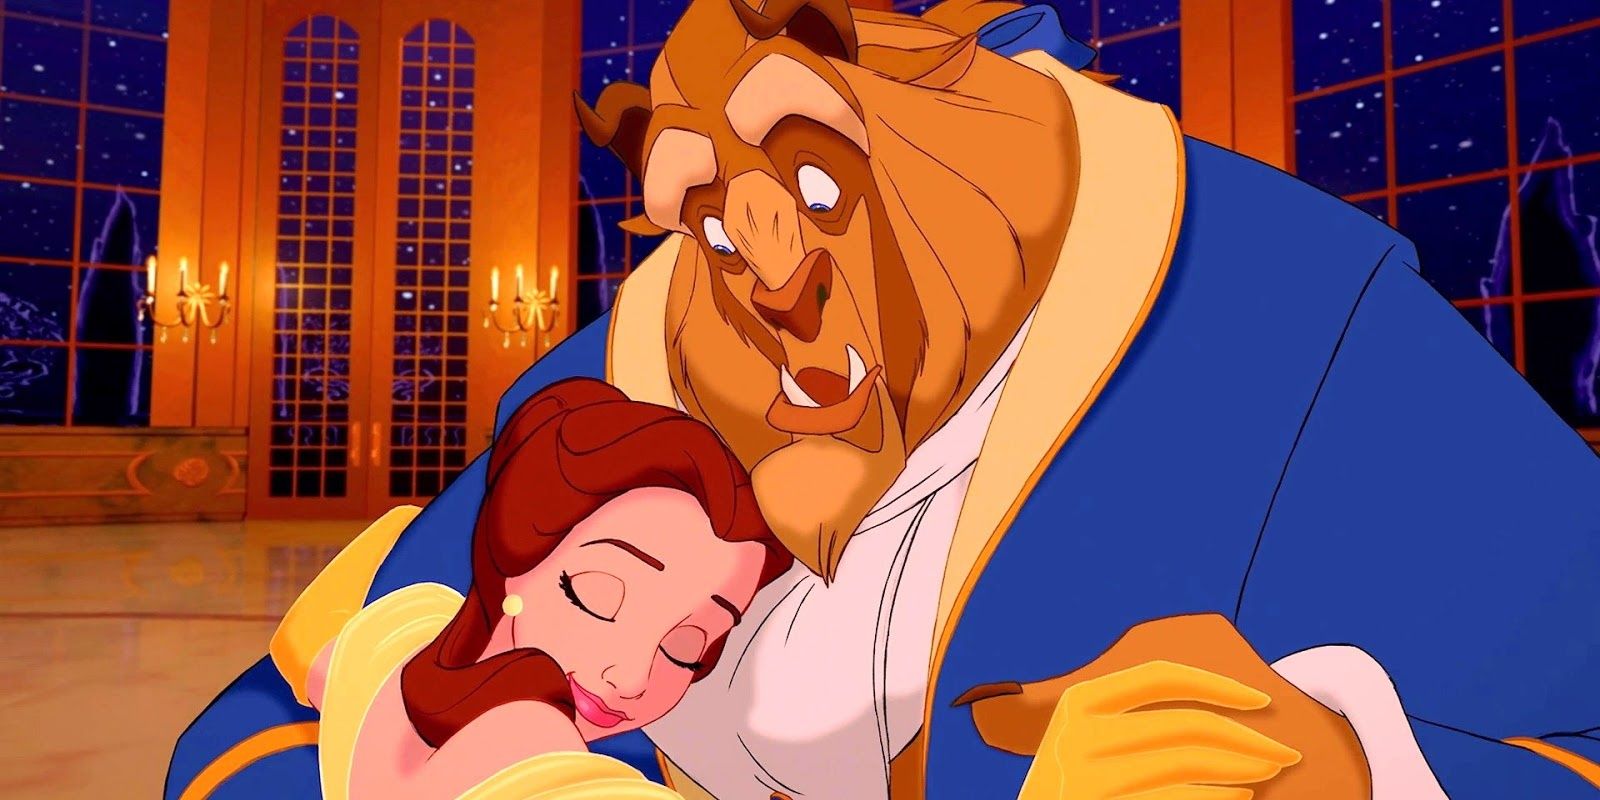 Belle dancing with the beast.